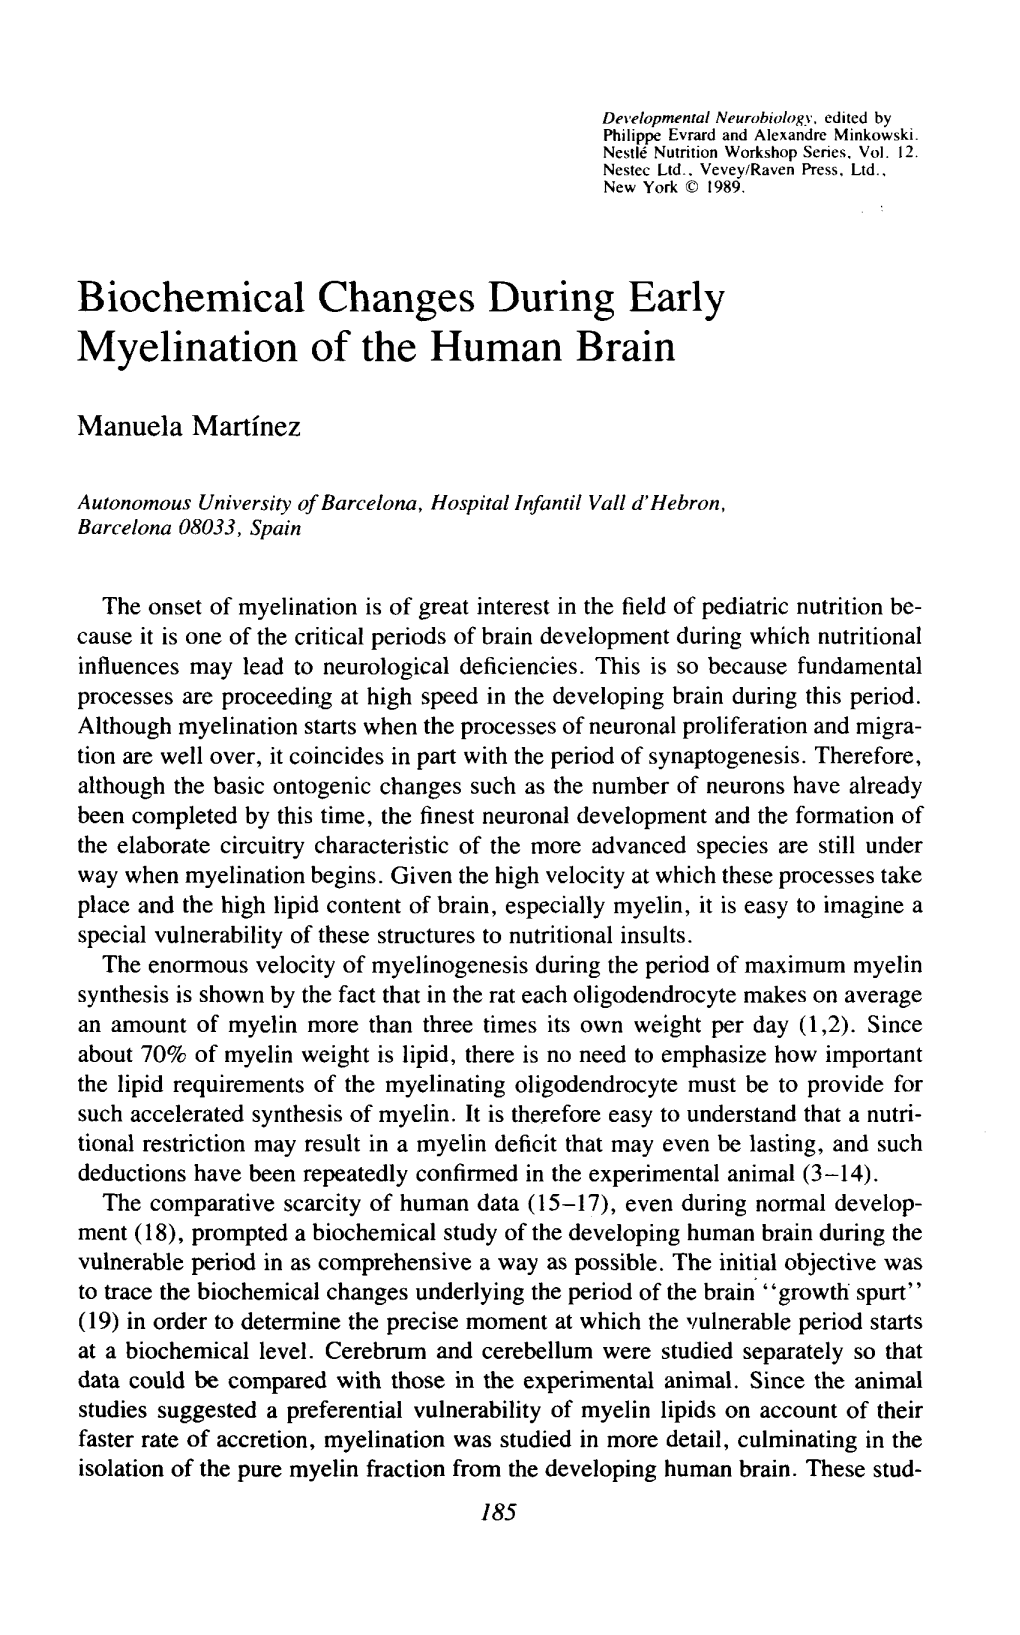 Biochemical Changes During Early Myelination of the Human Brain